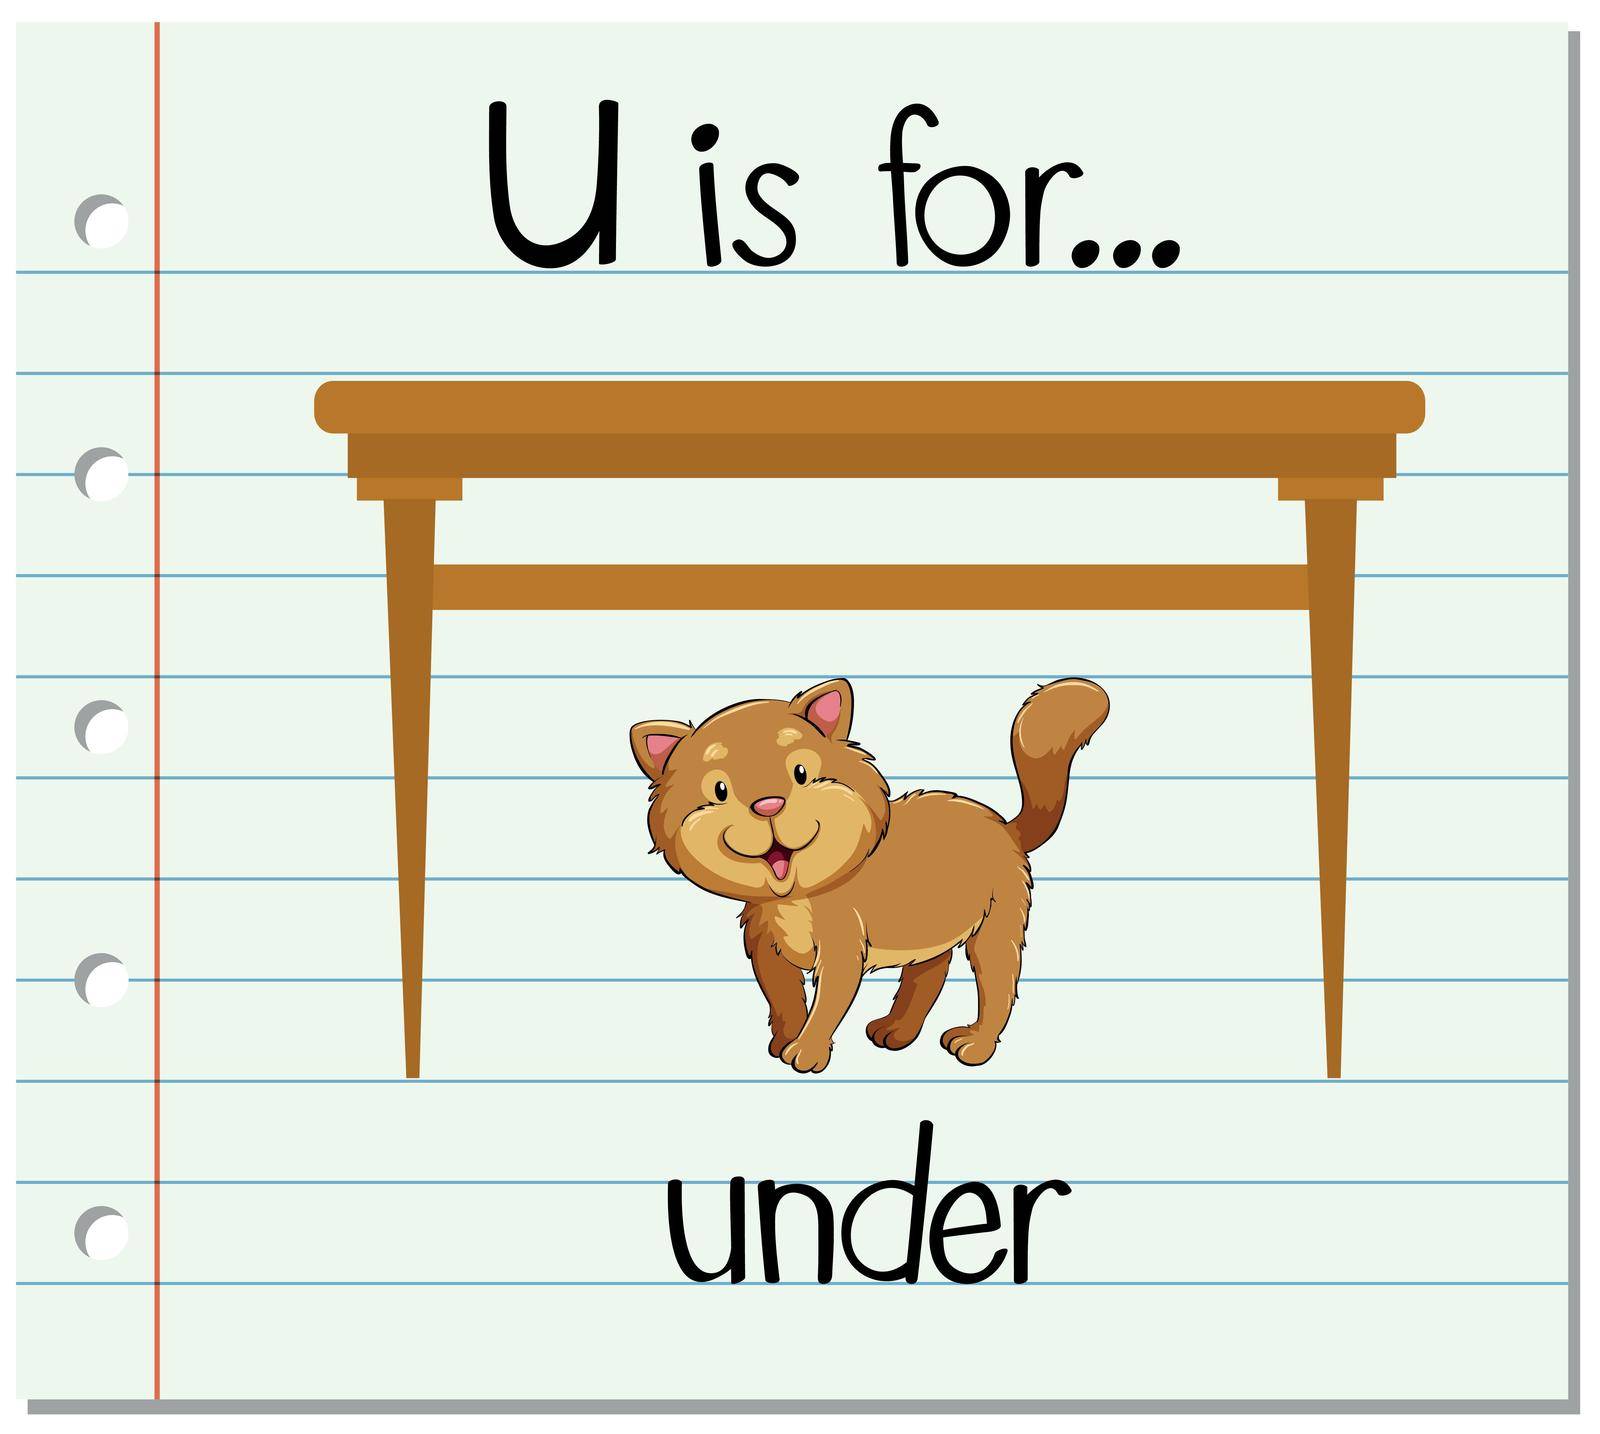 Flashcard letter U is for under by iimages